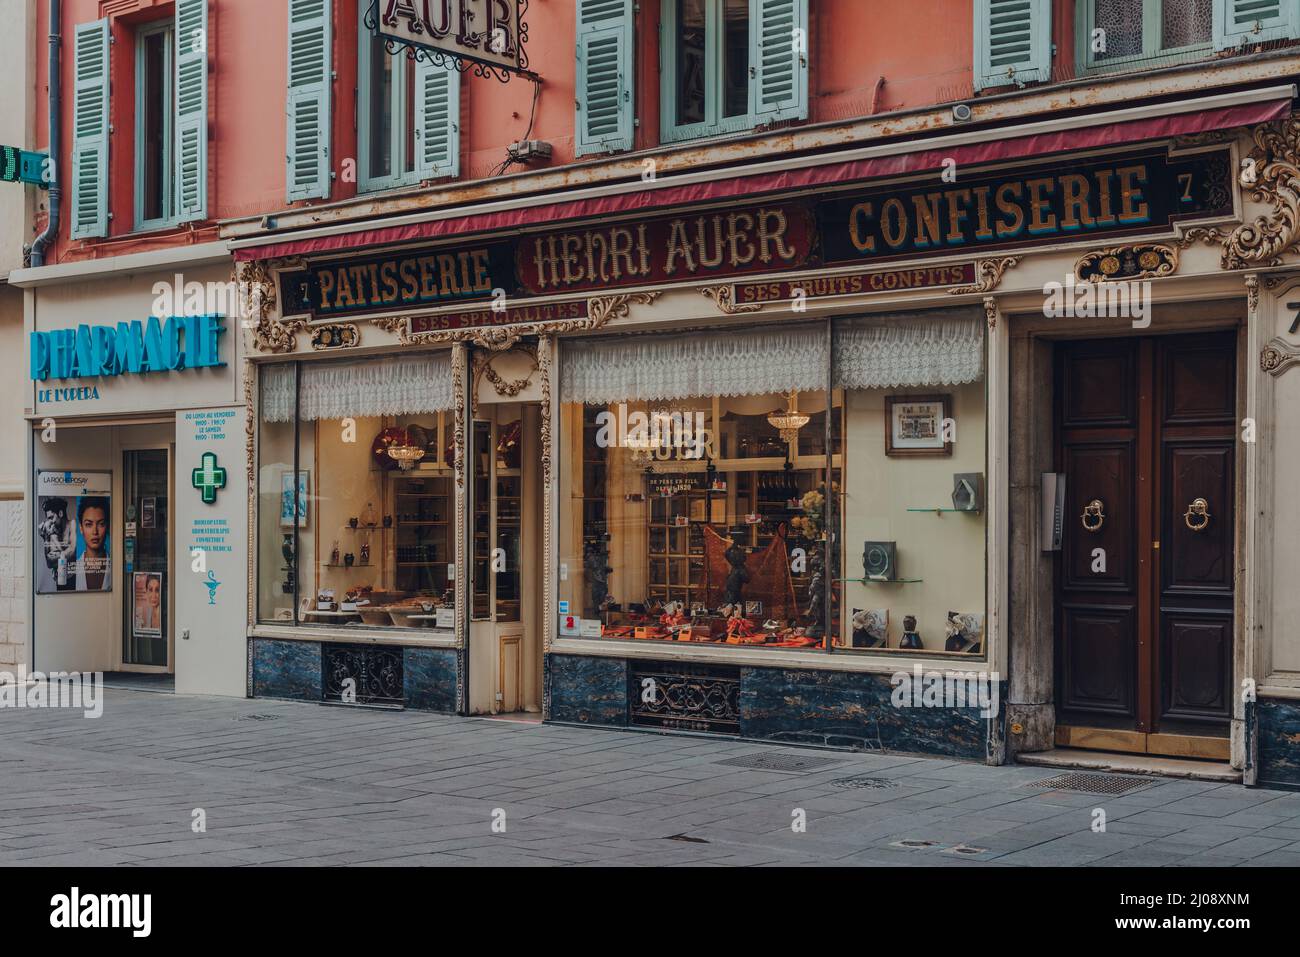 Nice, France - March 10, 2022: Exterior of La Maison Auer, a family owned Chocolaterie and Confiserie in Nice dating back to 1820. Stock Photo